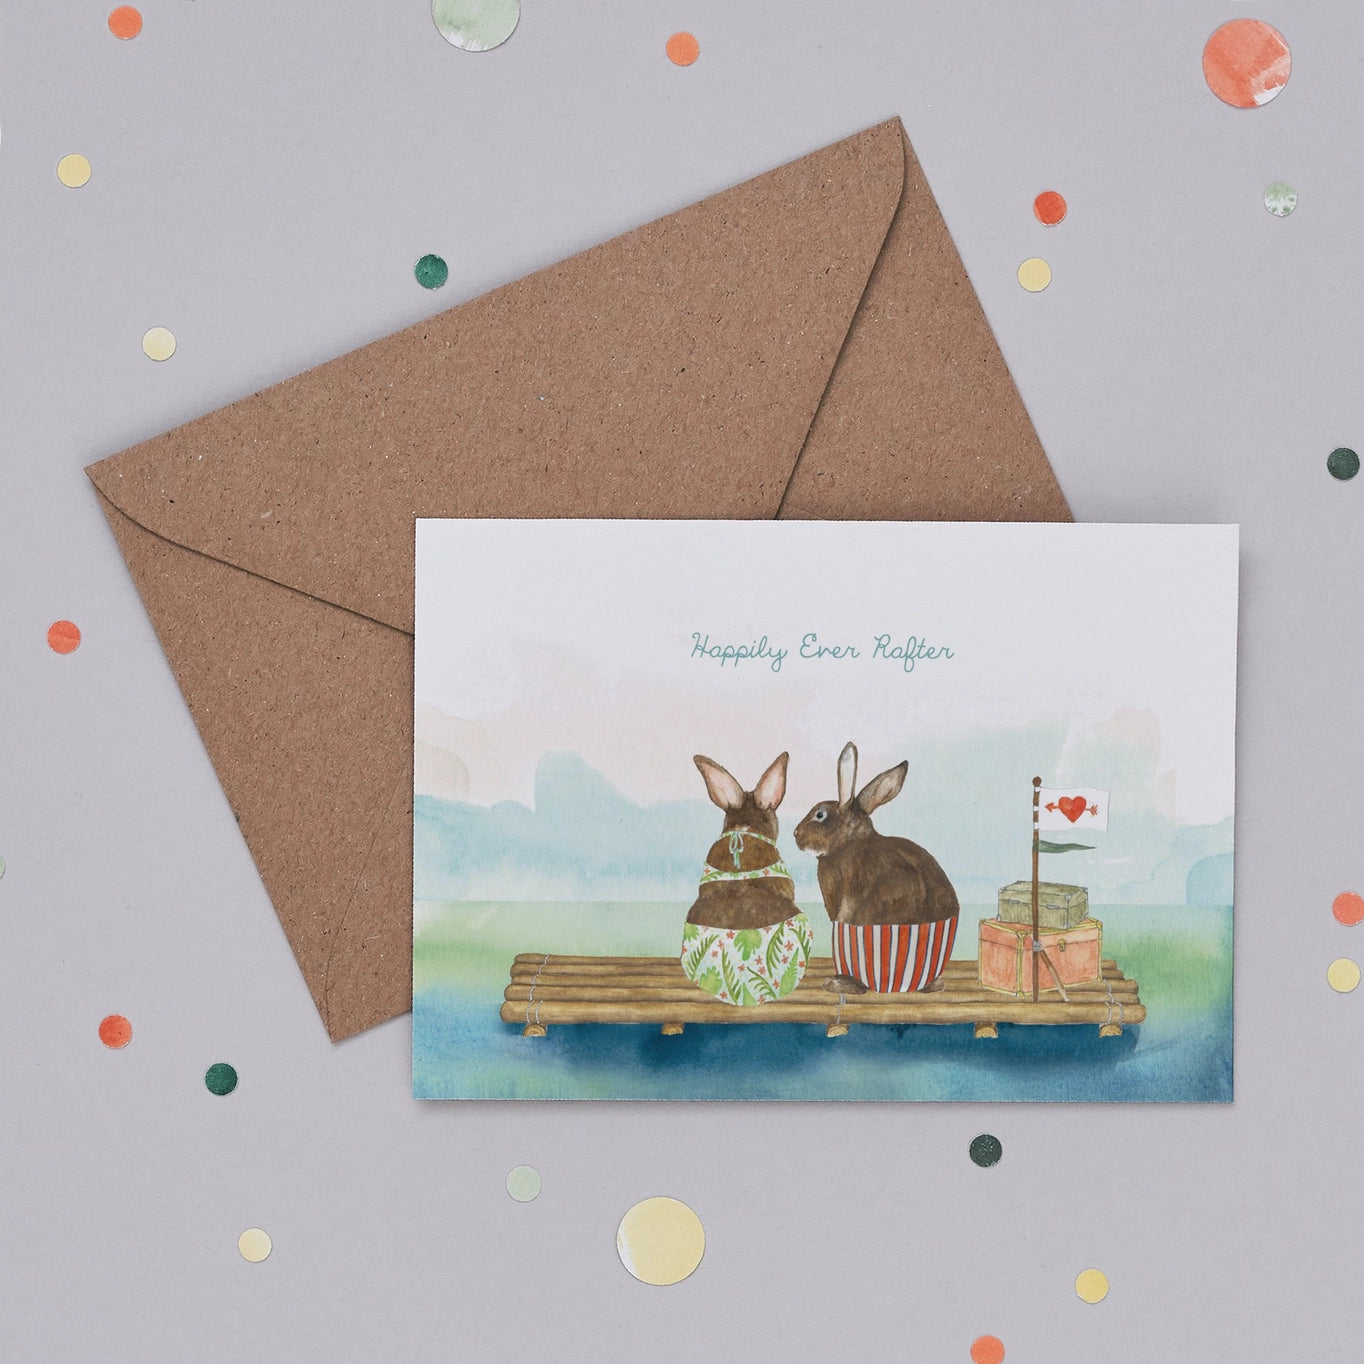 Happily Ever Rafter Greetings Card